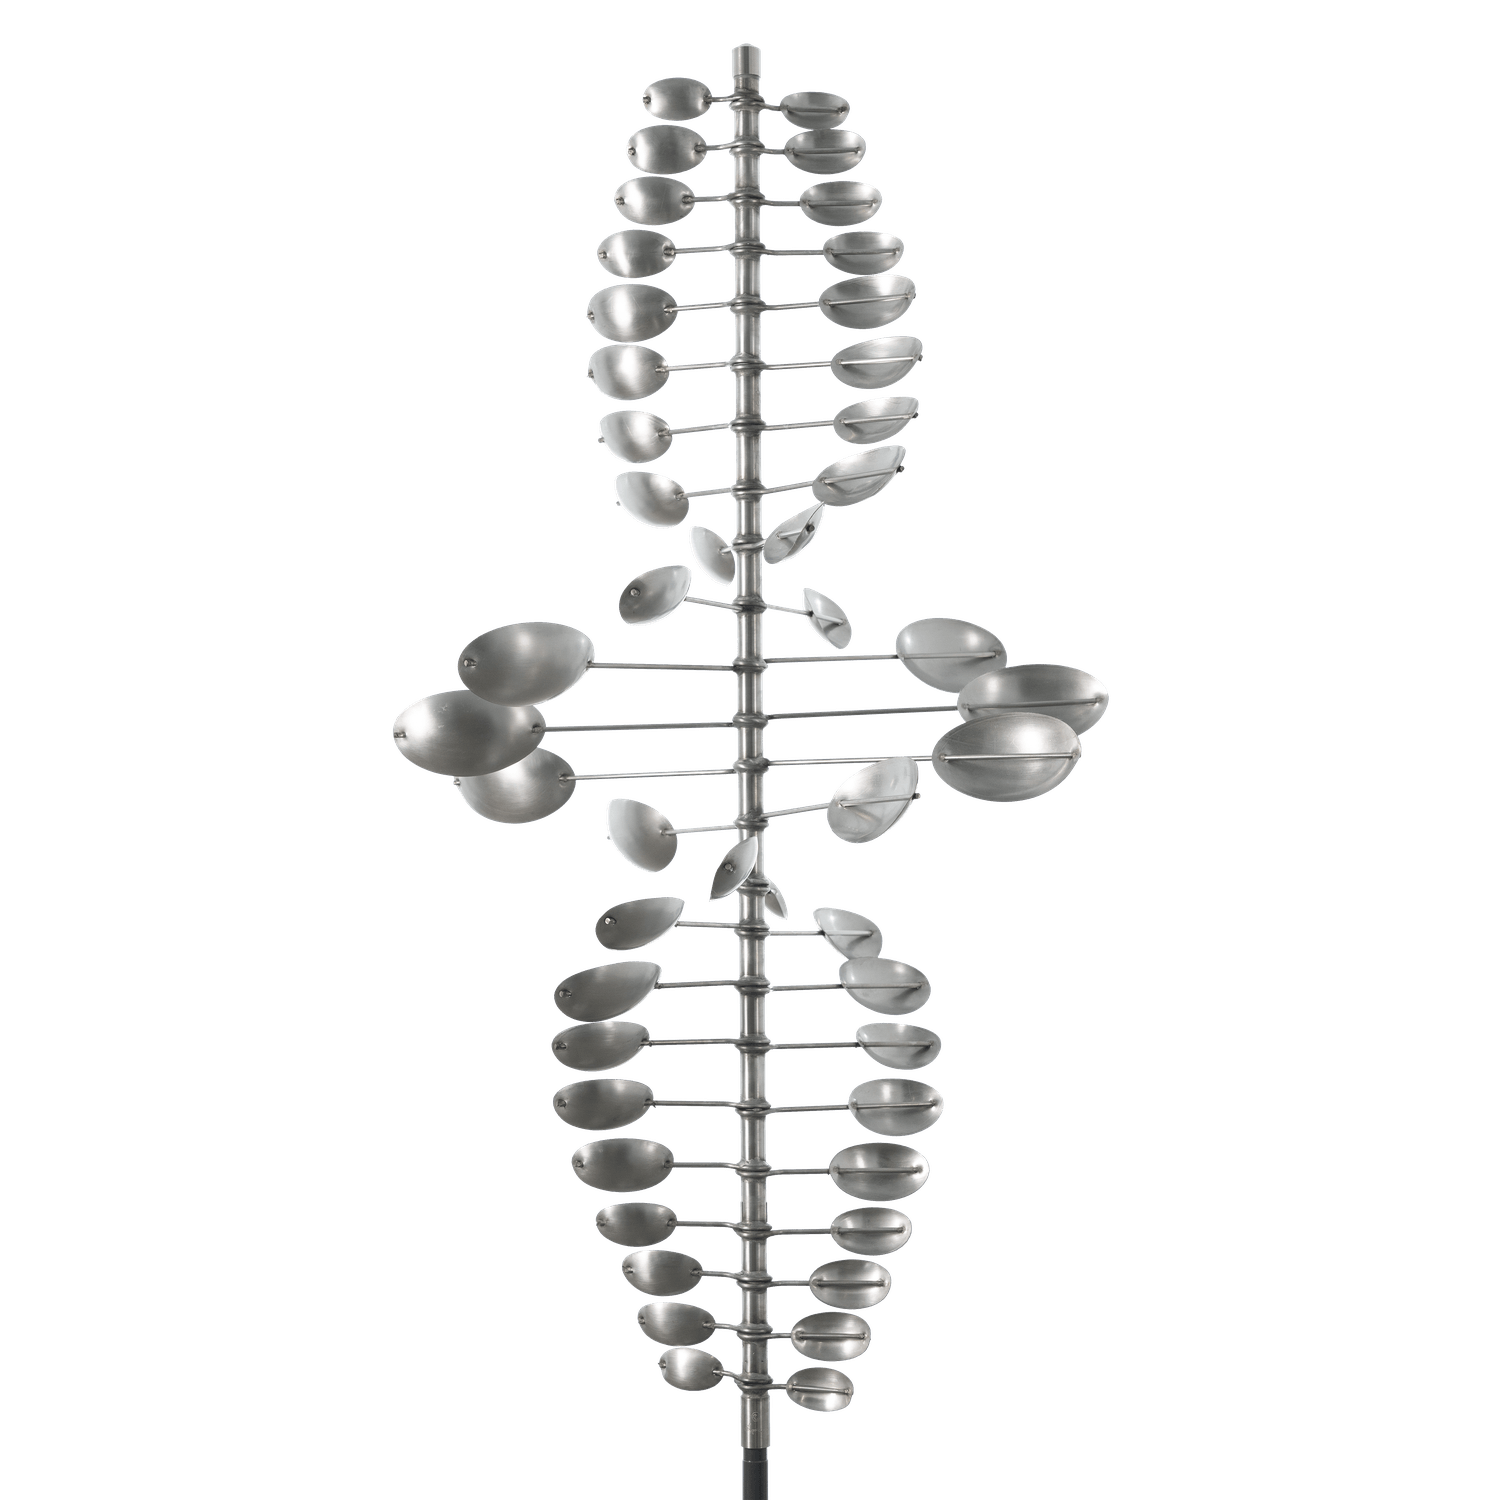 Twister Oval Wind Sculpture Stainless